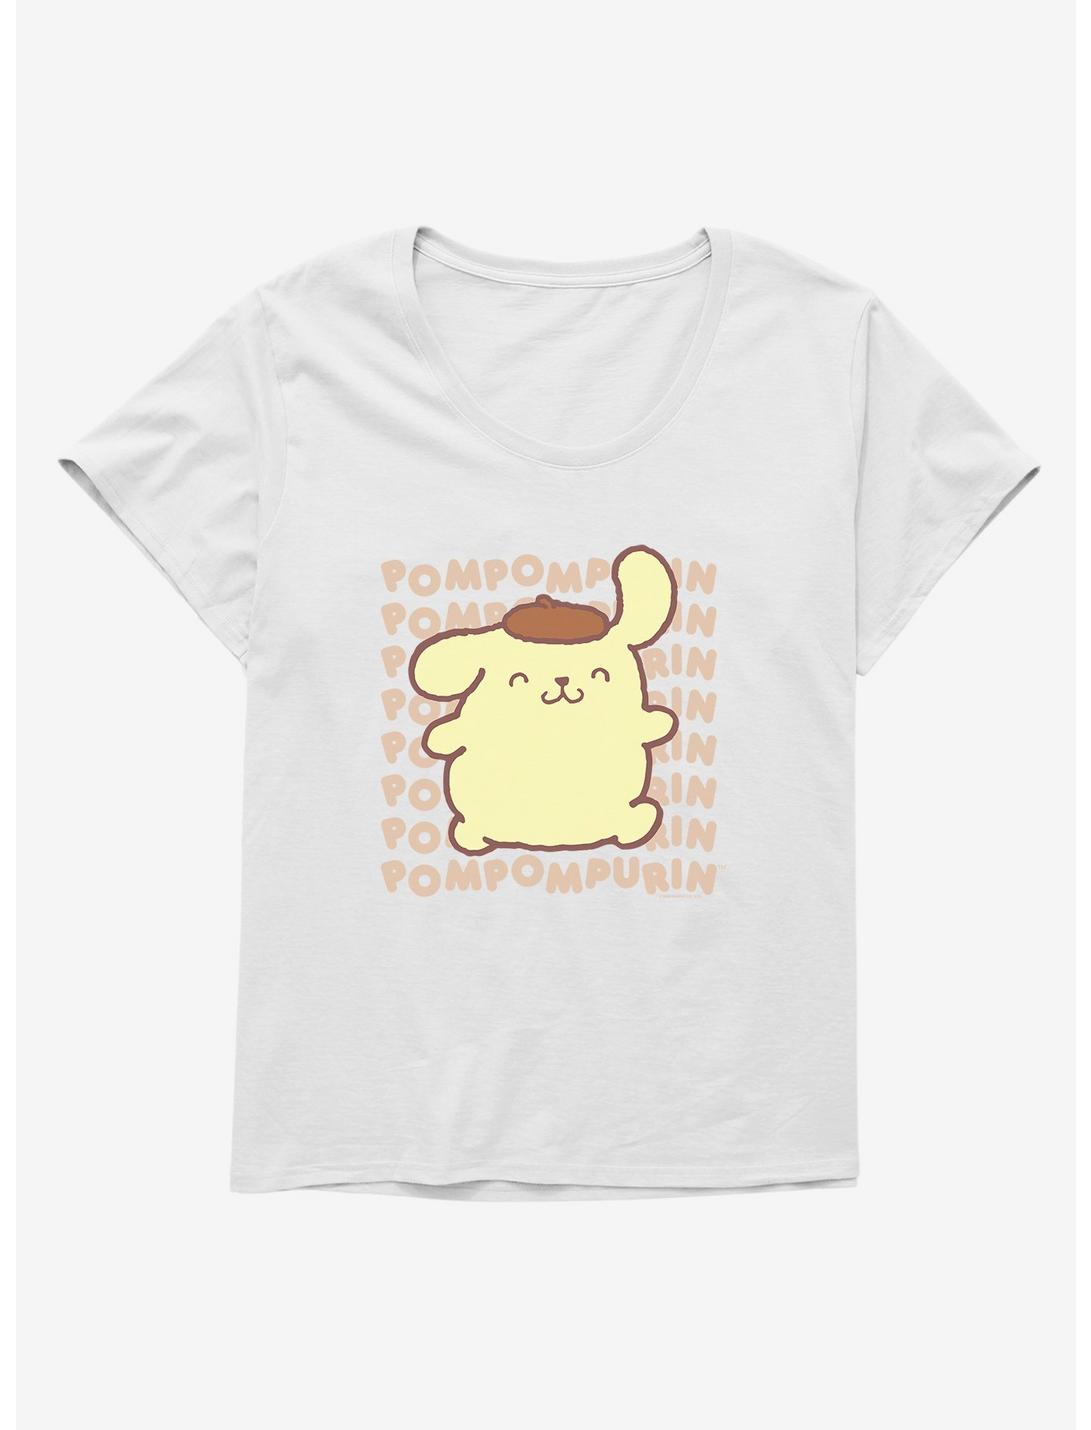 Pompompurin Character Name  Womens T-Shirt Plus Size, WHITE, hi-res